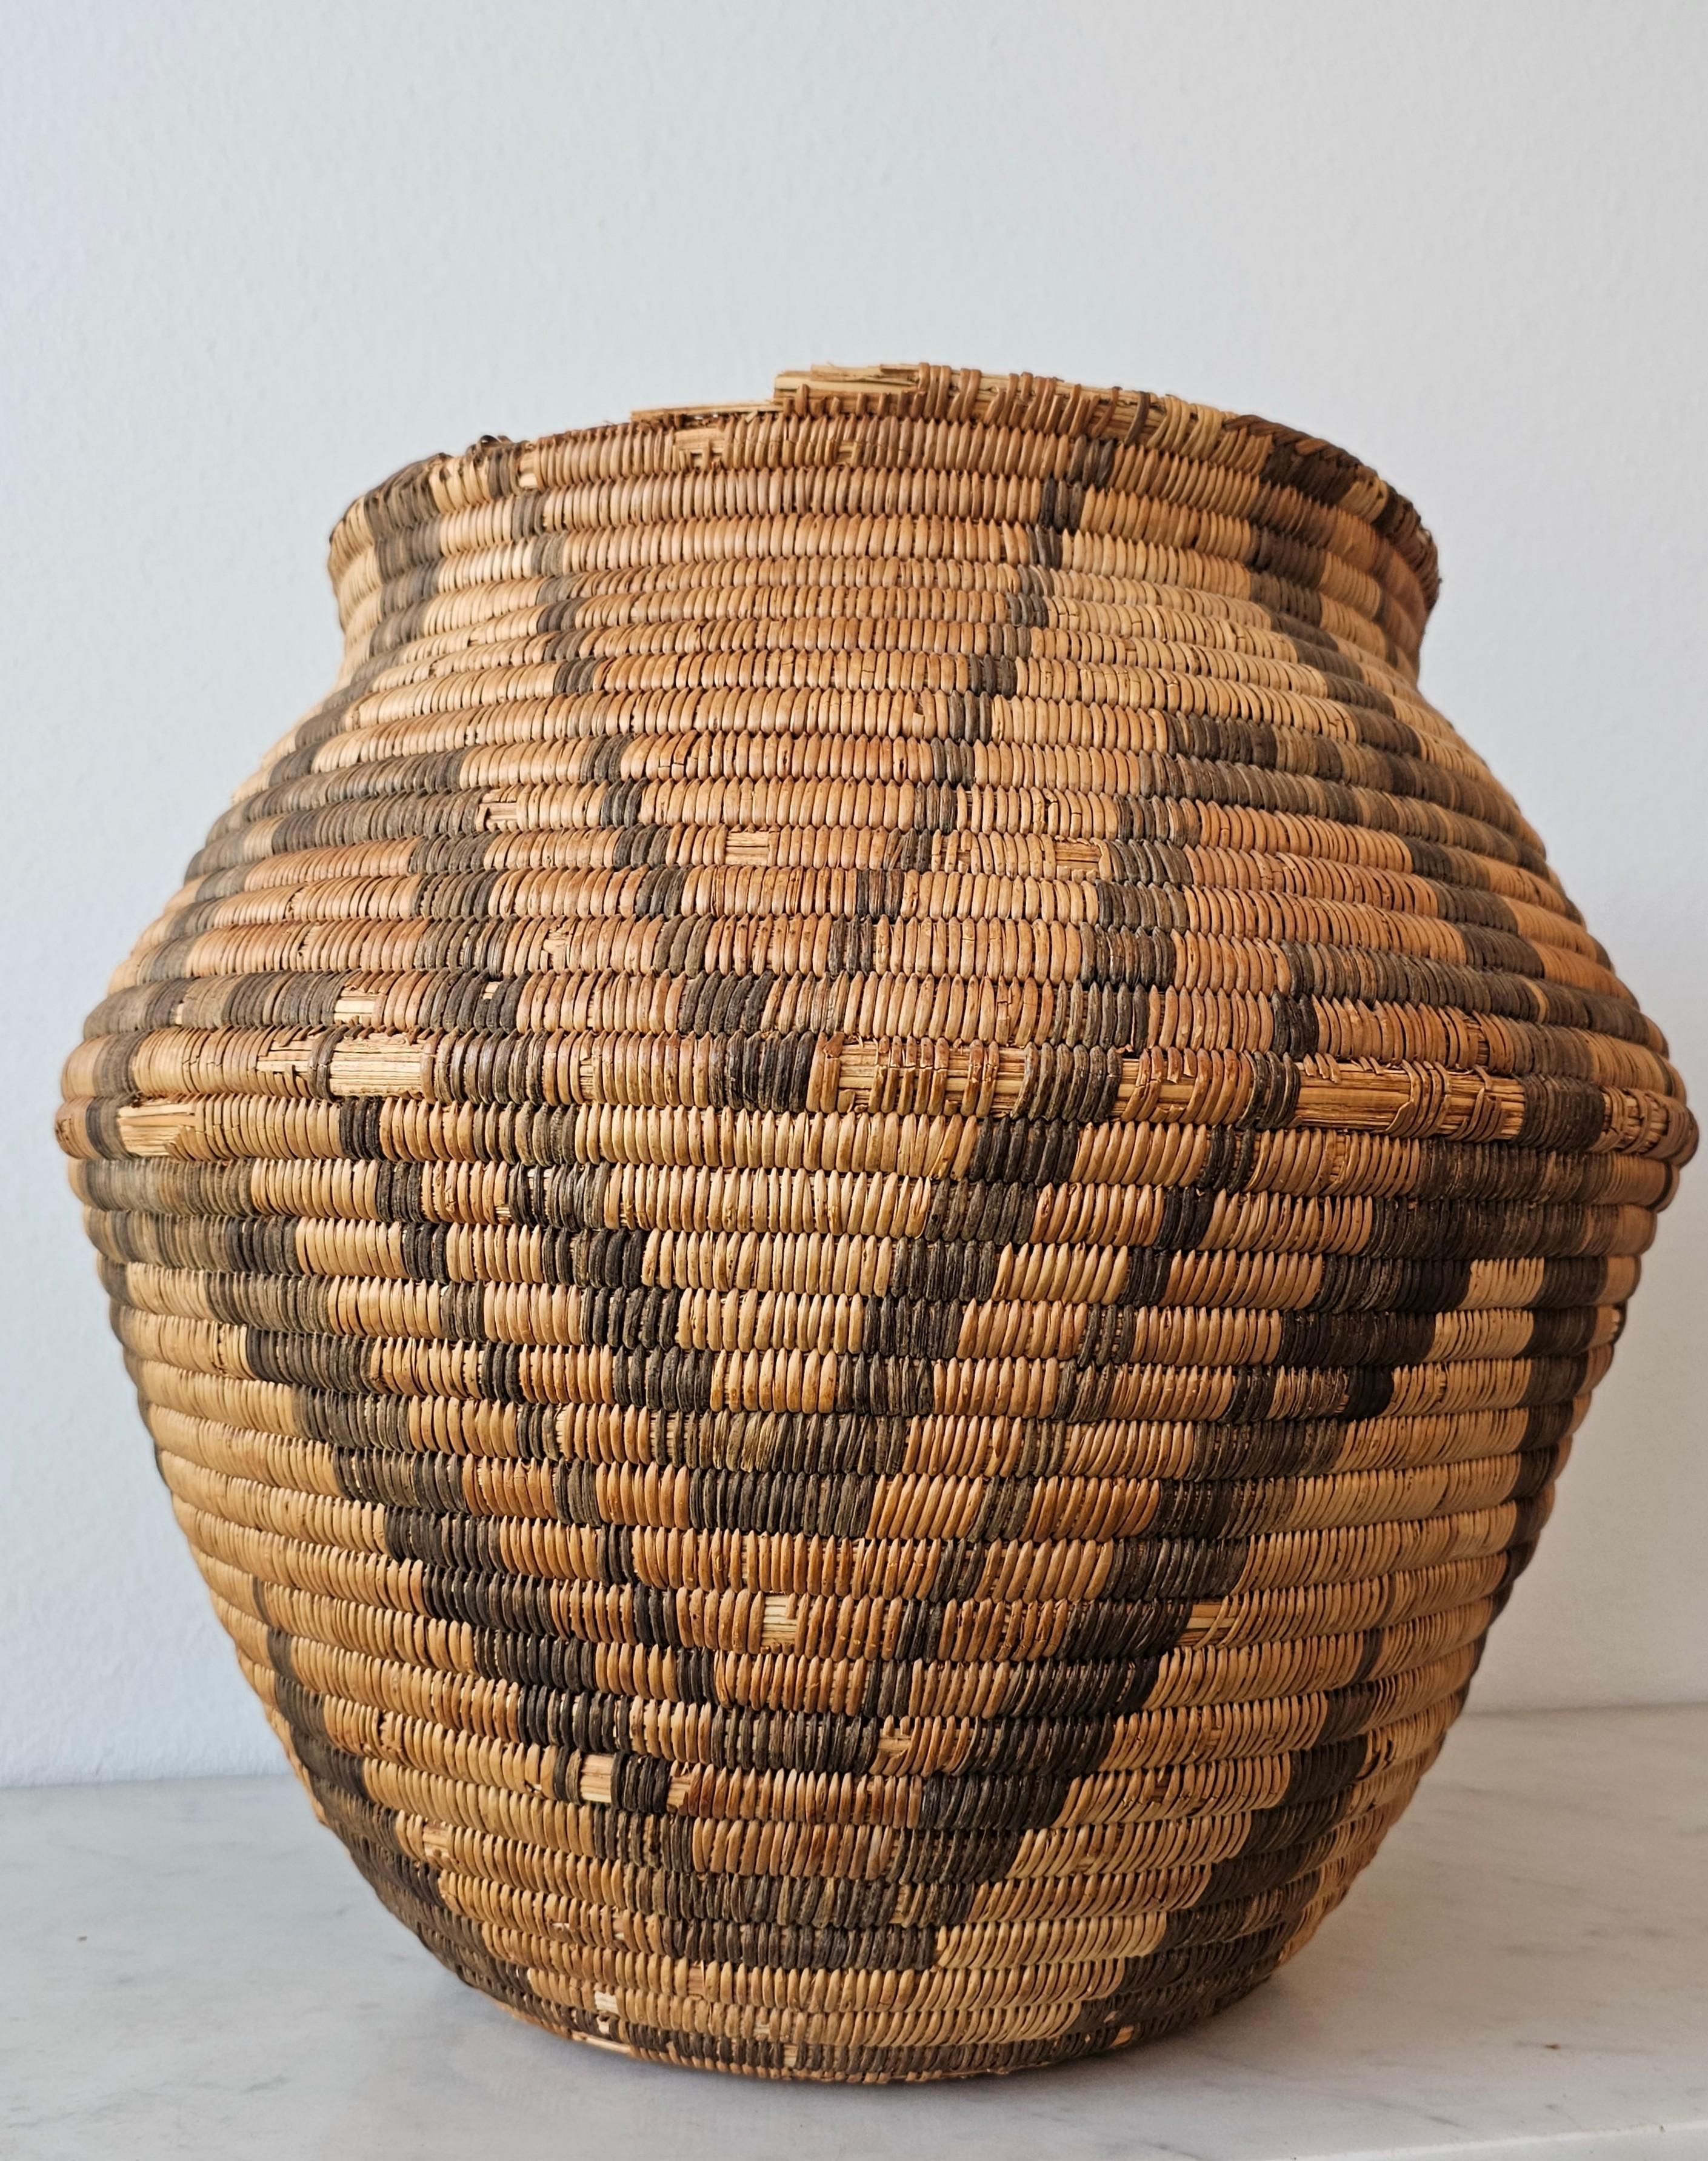 Hand-Woven Antique Apache Olla Jar Coiled Willow Wicker Devil's Claw Basket  For Sale